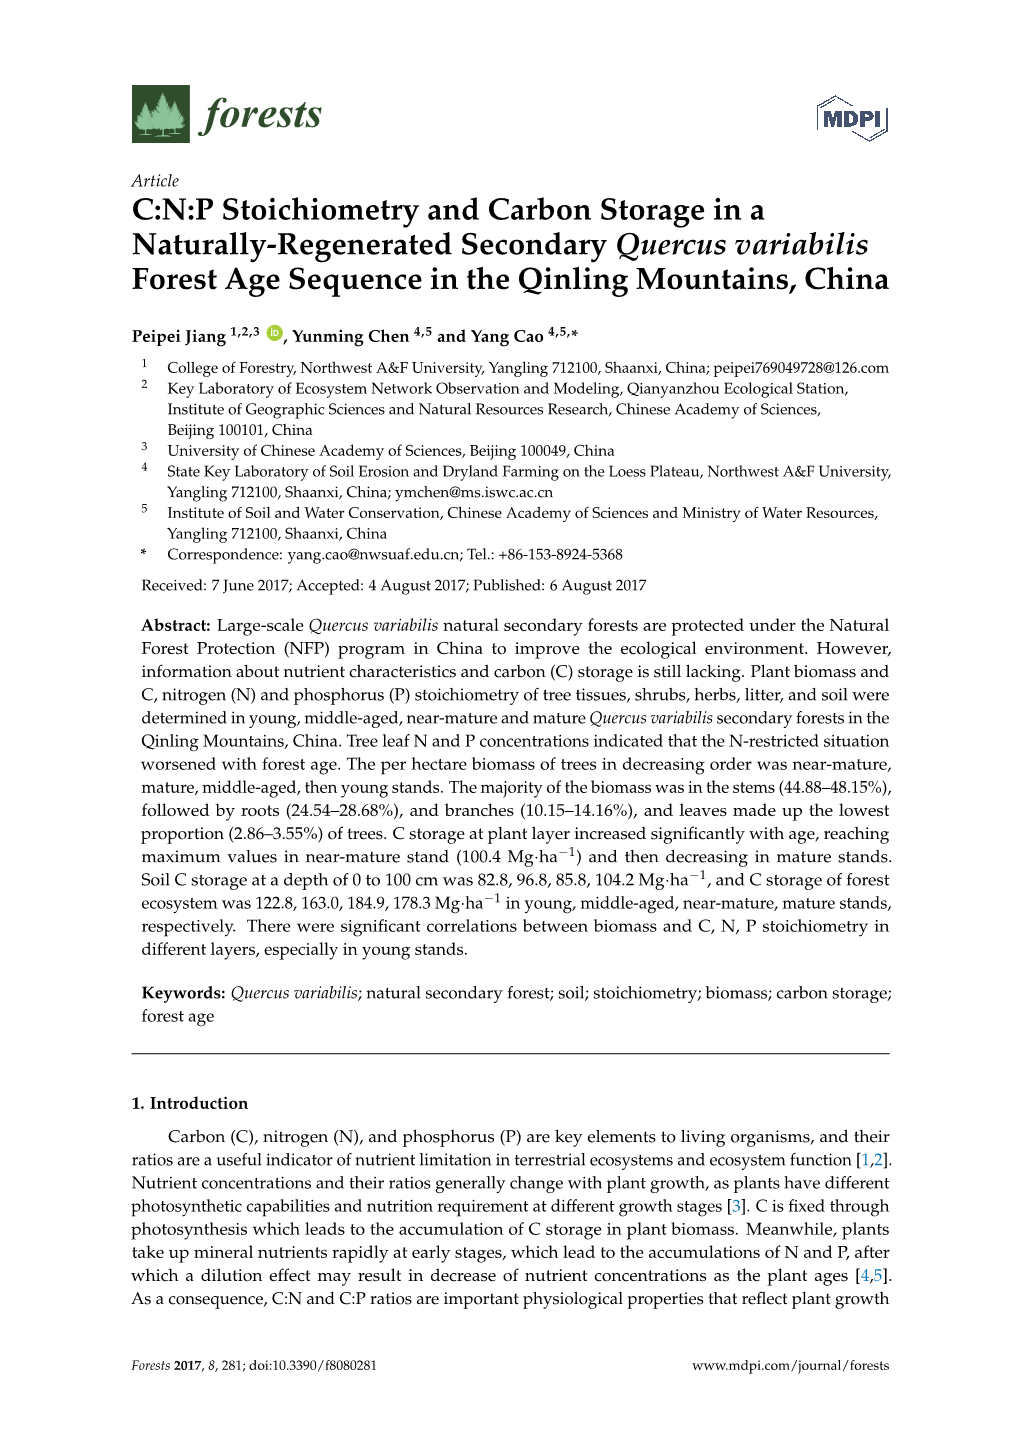 C:N:P Stoichiometry and Carbon Storage in a Naturally-Regenerated Secondary Quercus Variabilis Forest Age Sequence in the Qinling Mountains, China